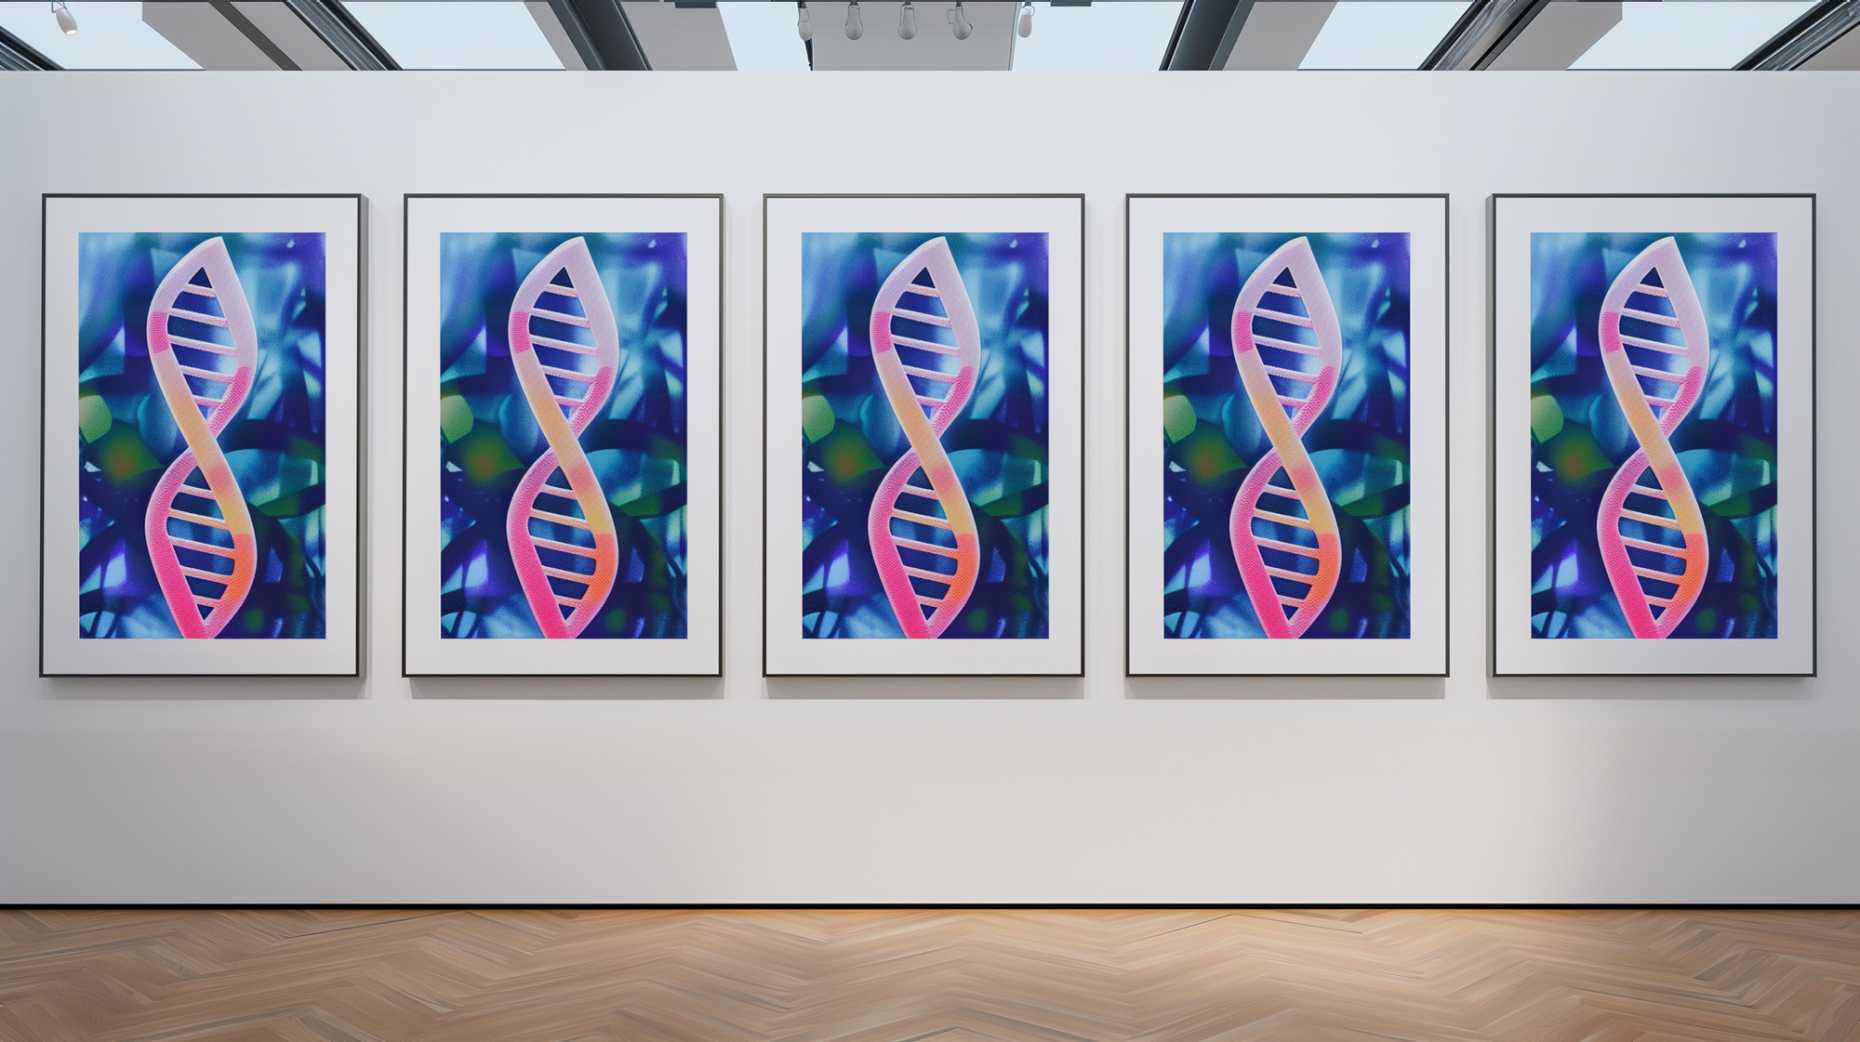 Five identical artworks showing a DNA double helix each.